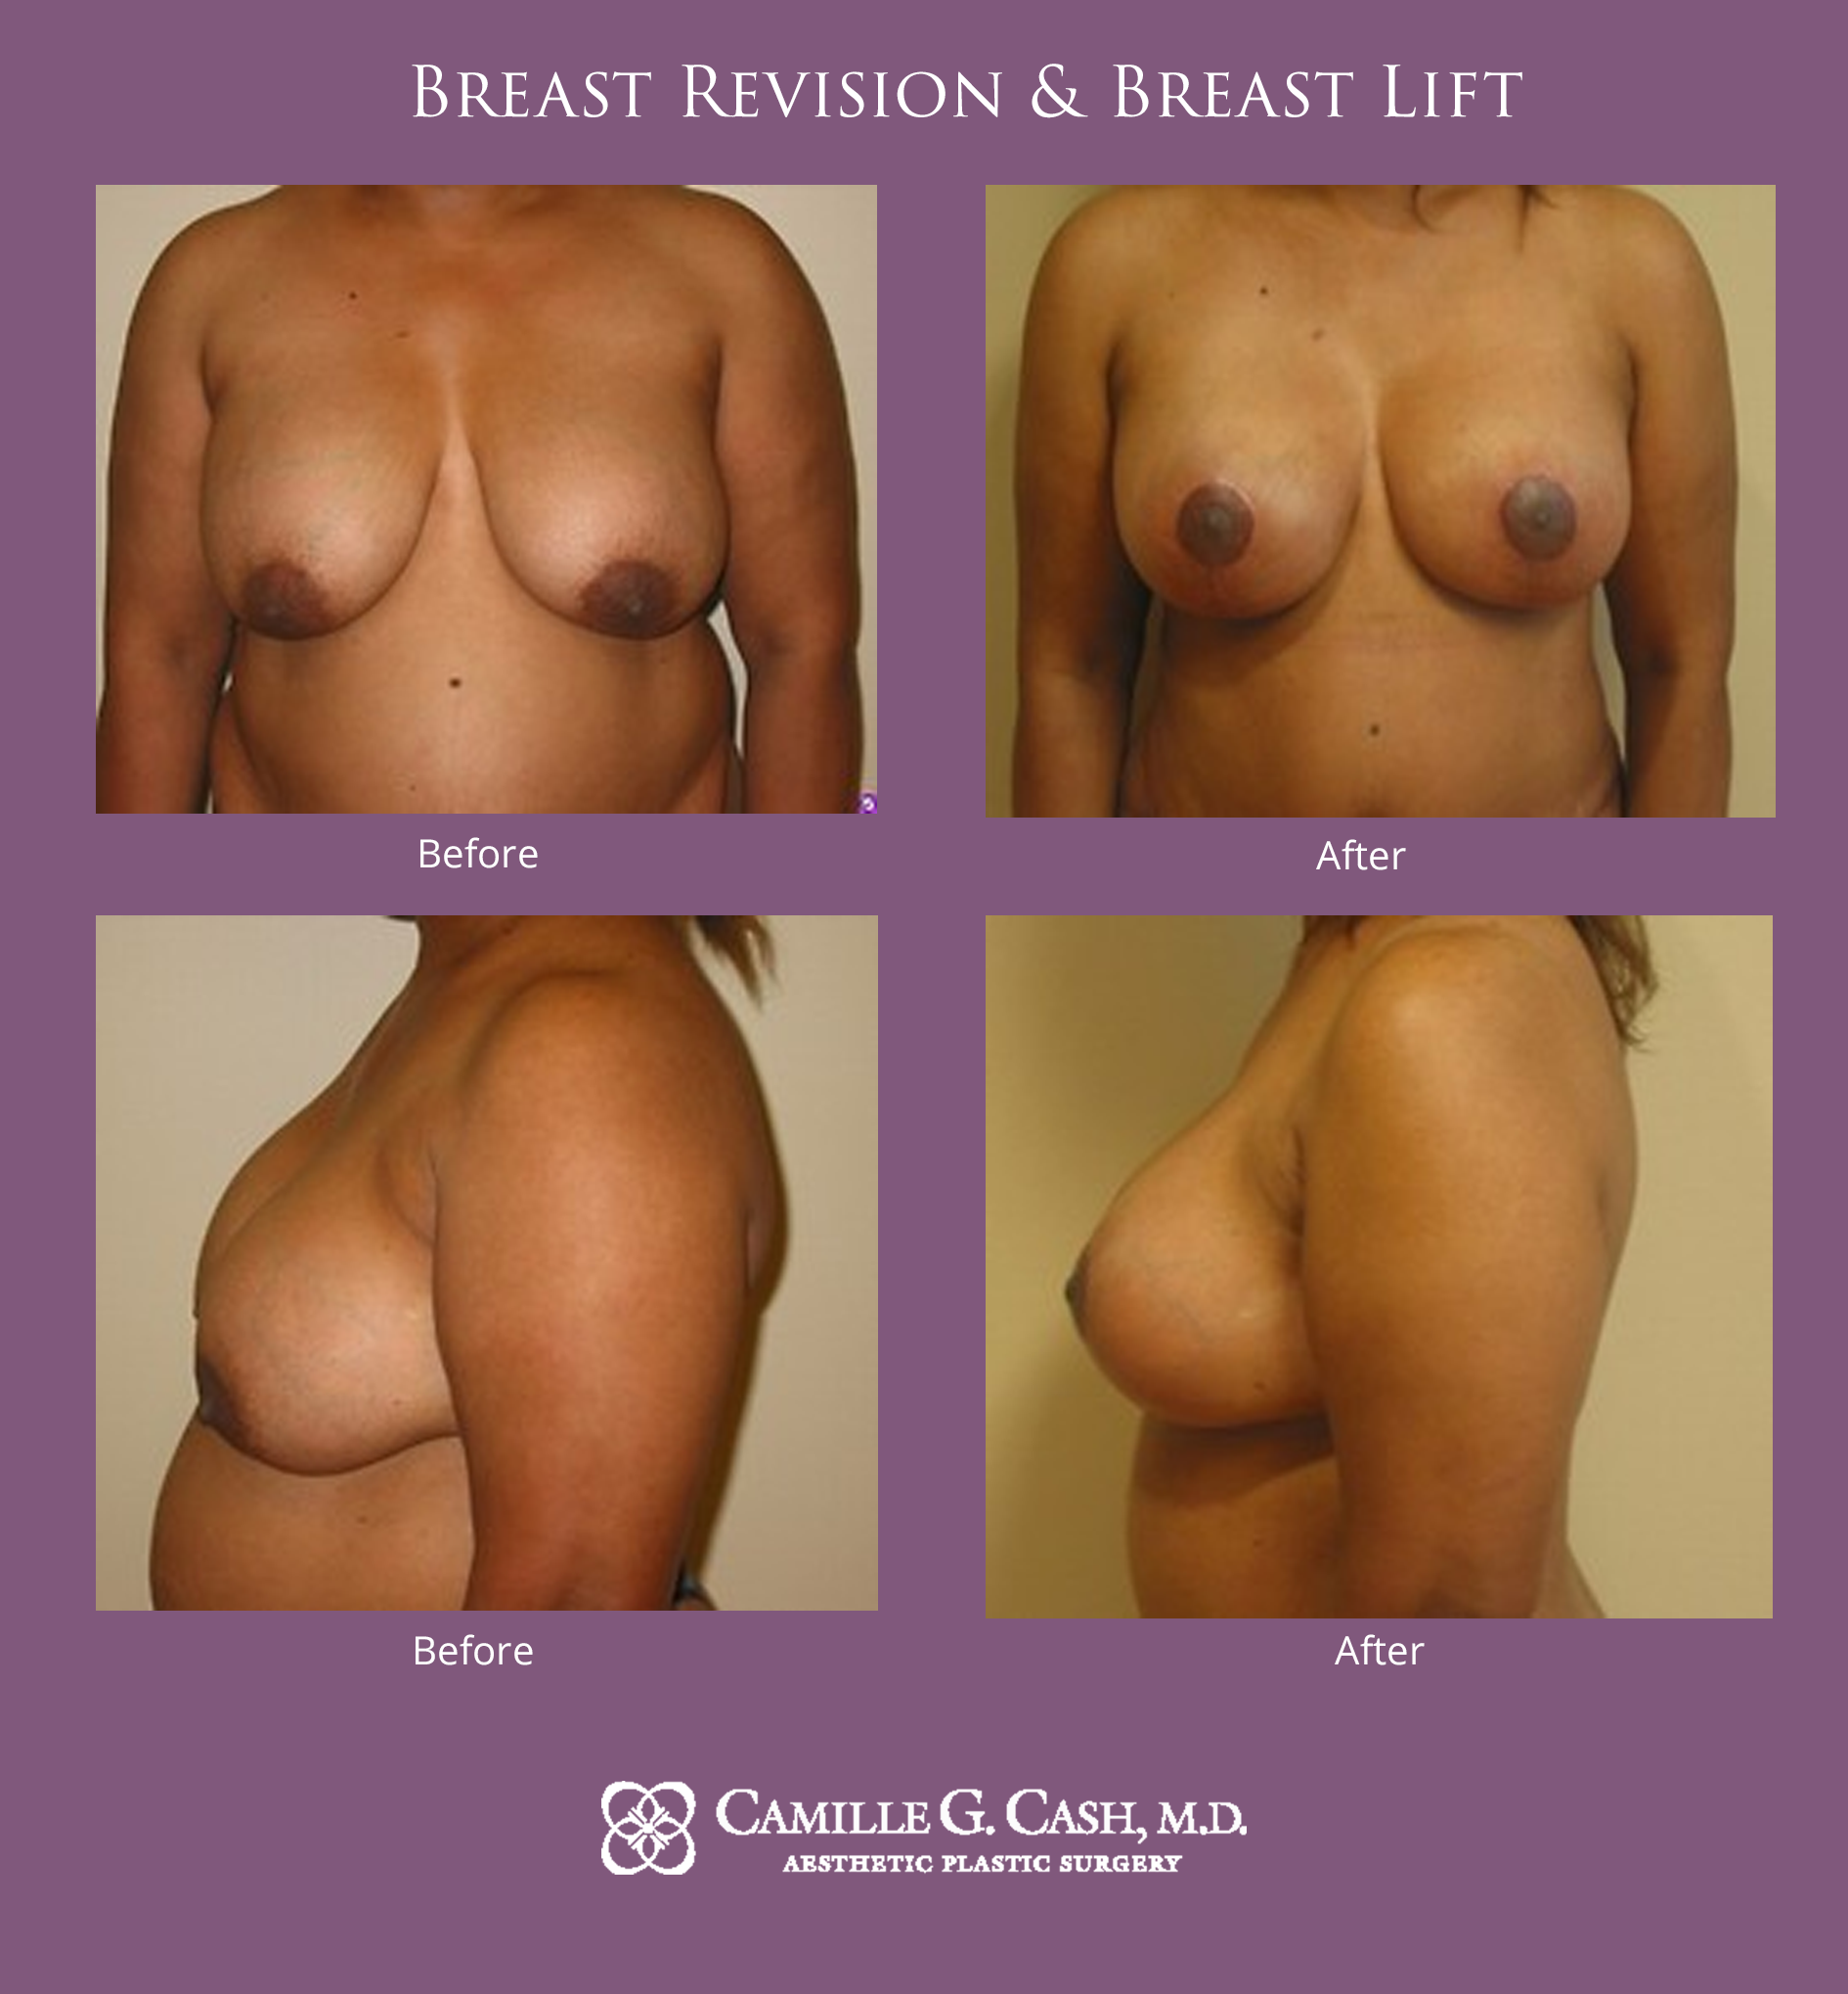 Breast revision and breast lift before and after photos